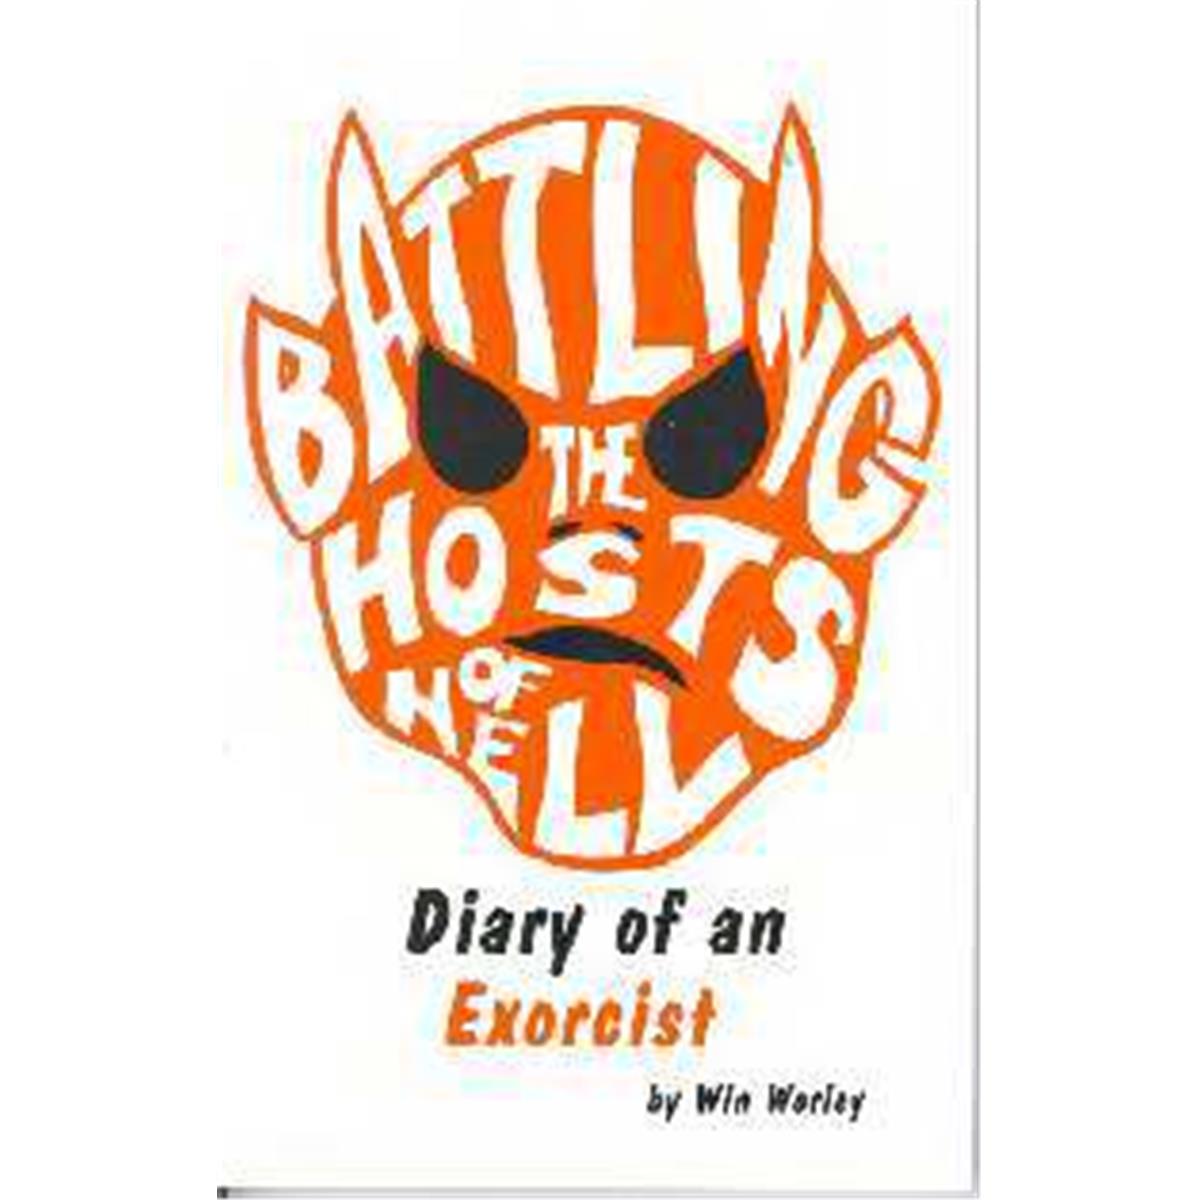 Wrw Publications 990427 Battling The Host Of Hell Diary Of An Exorcist